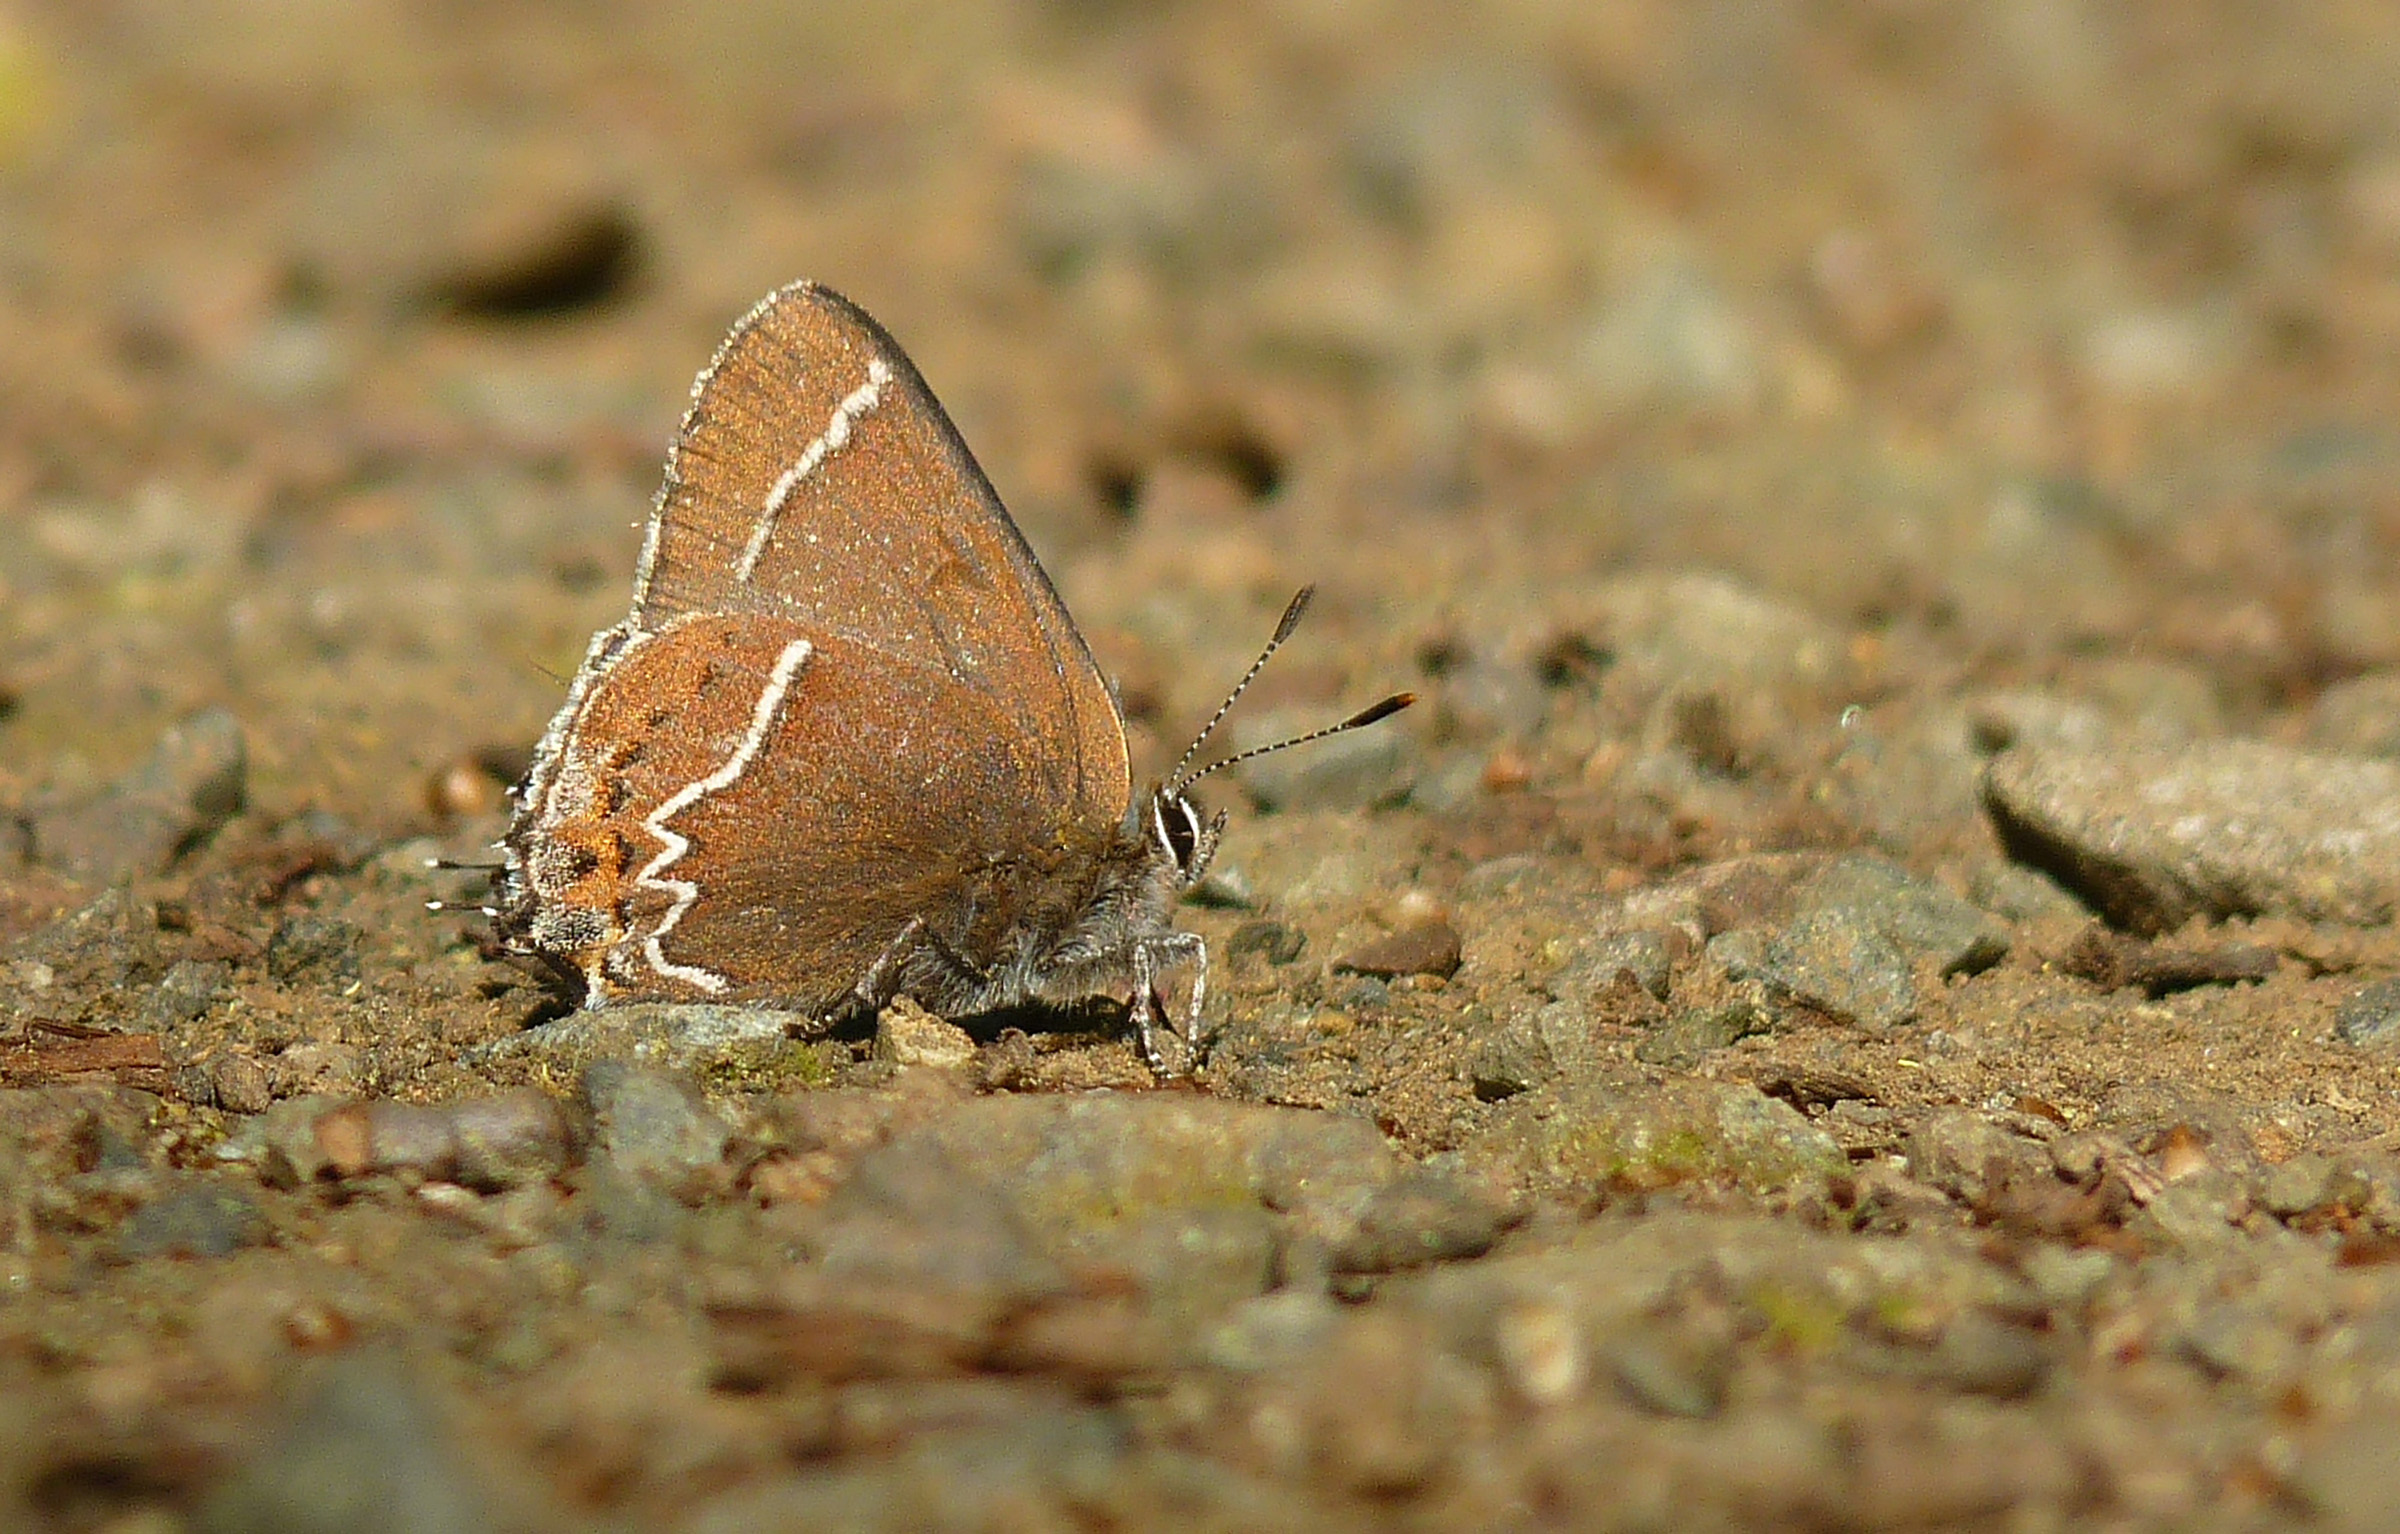 A golden-brown butterfly with a bold, zig-zag white line across its wings. It is sitting on bare ground.